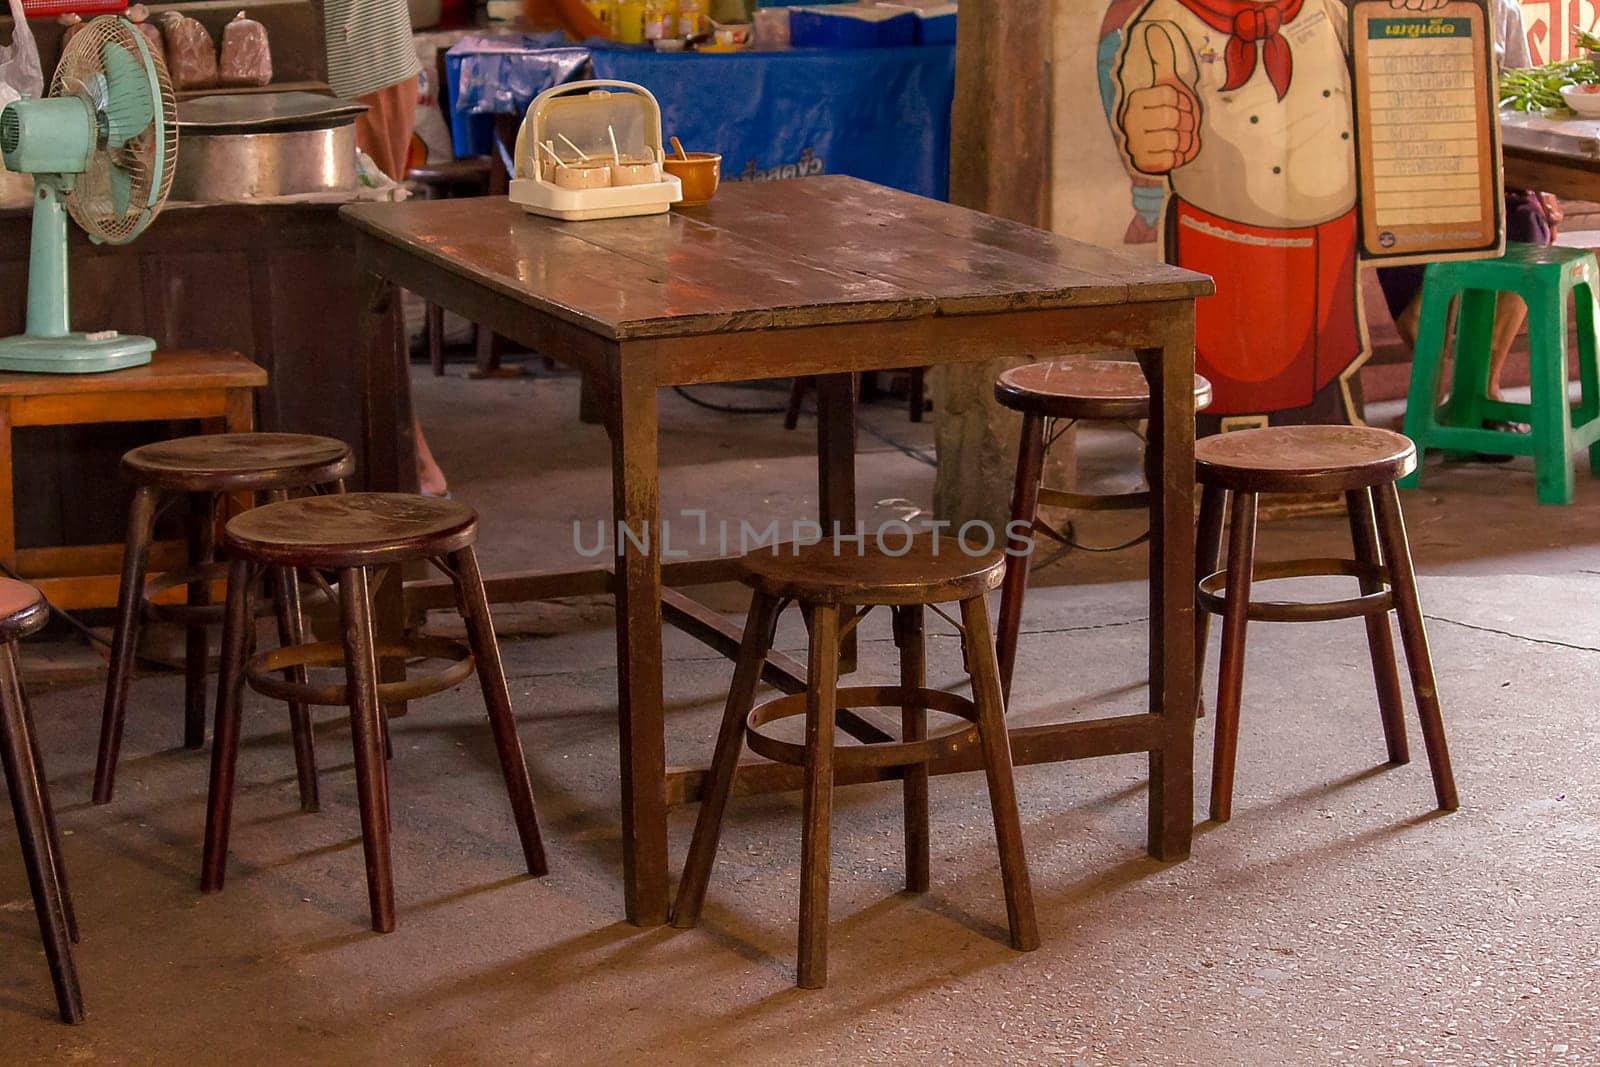 Old Chinese style wooden chairs and tables